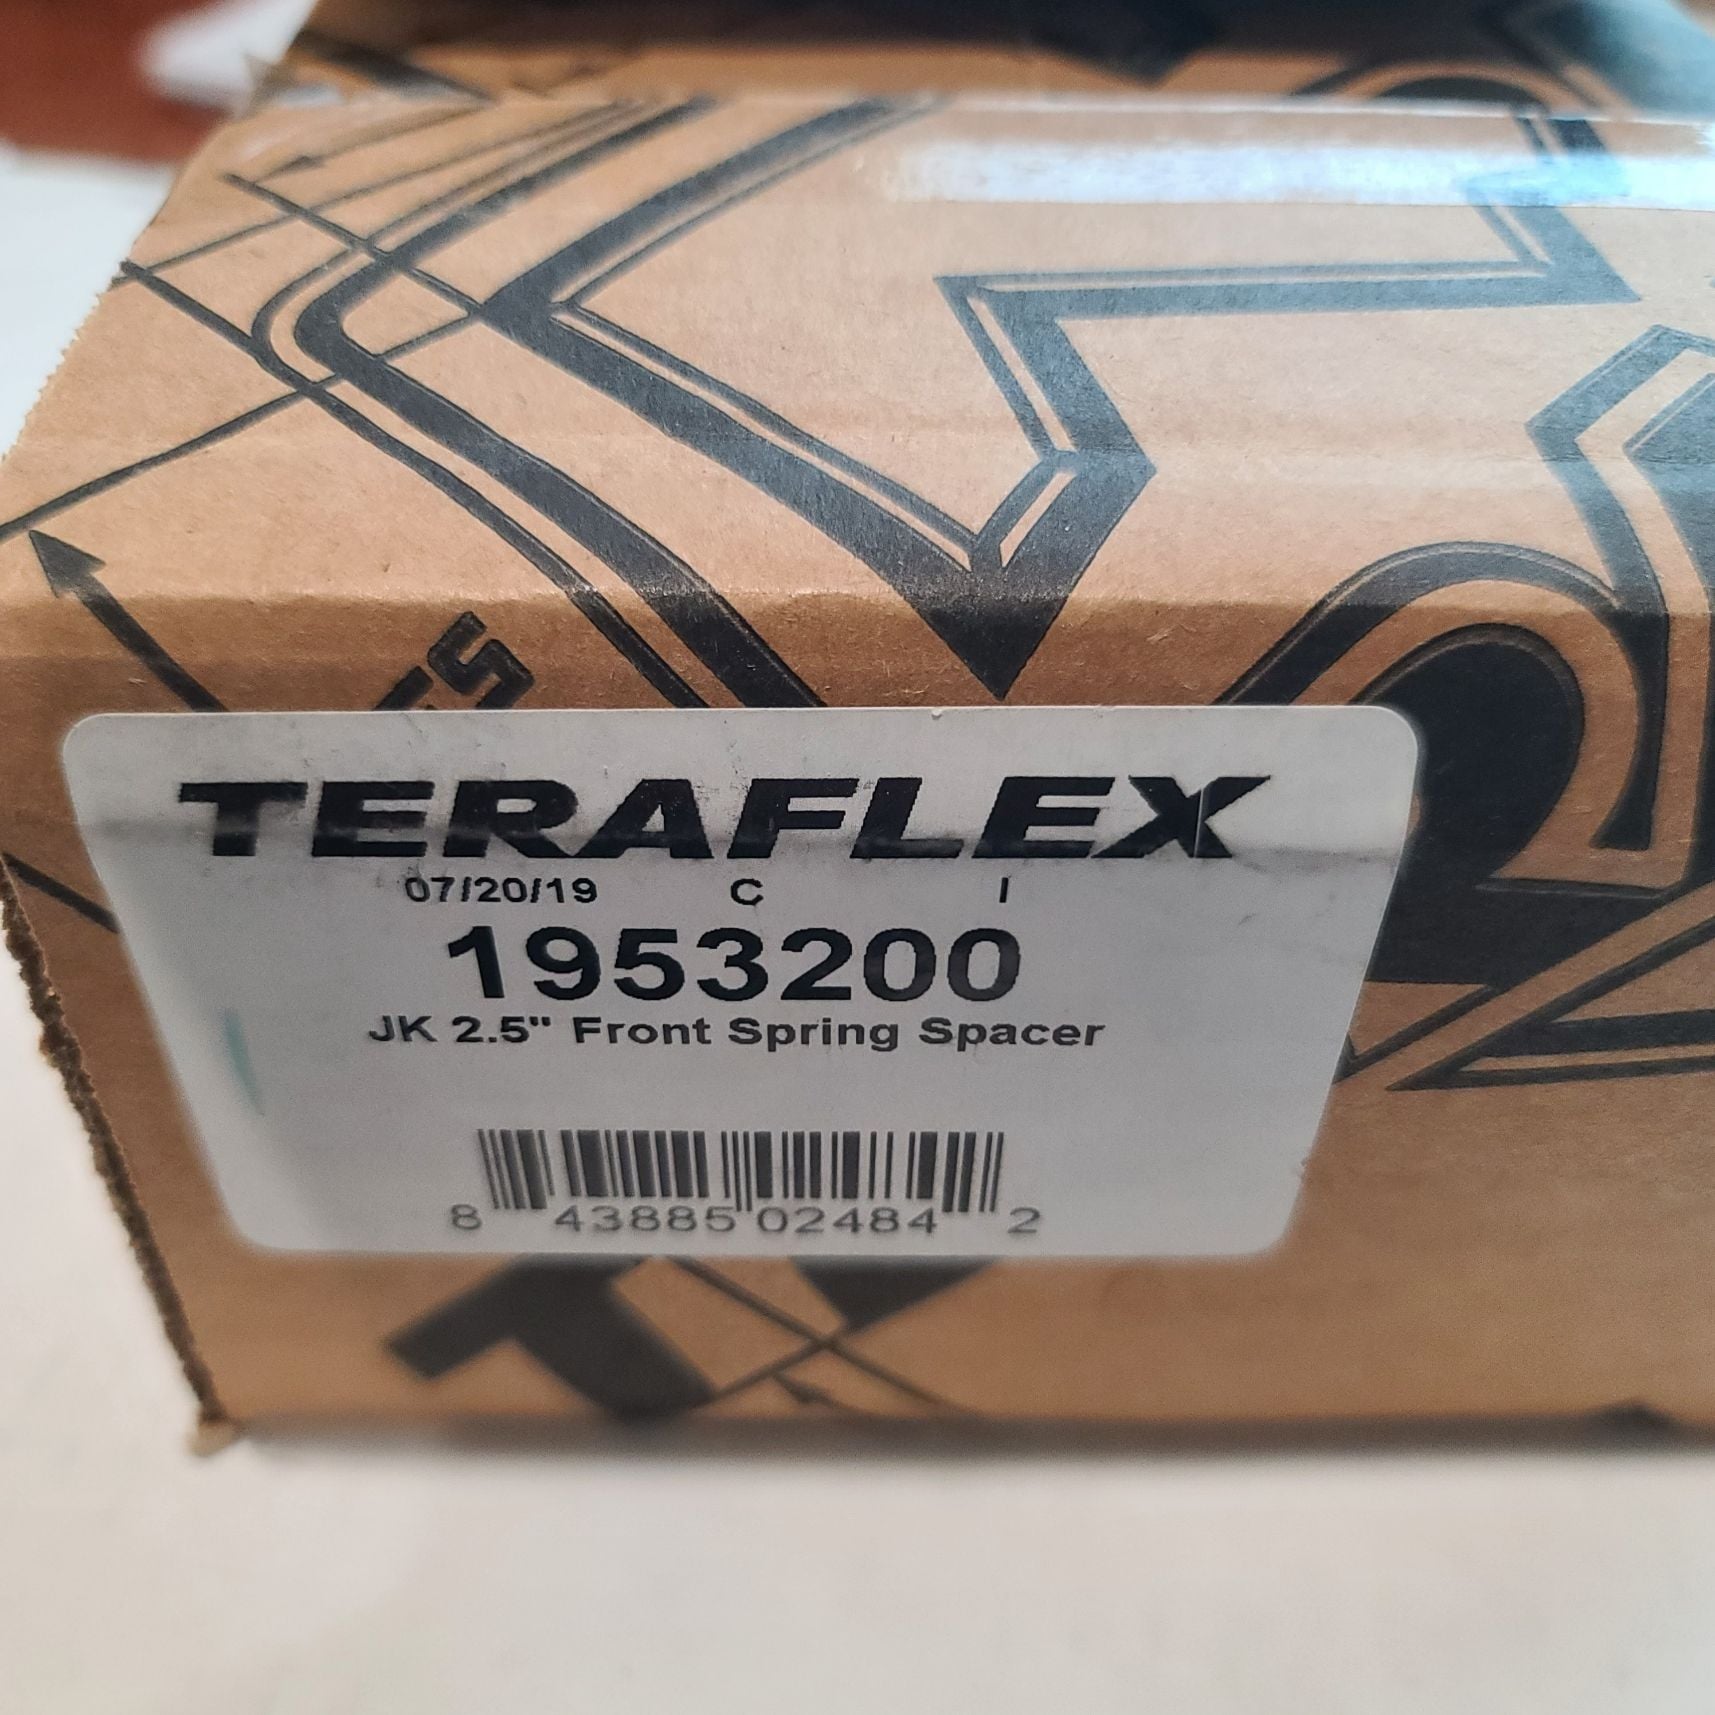 Steering/Suspension - Teraflex  2.5" Front Spring Spacers - New - 2007 to 2018 Jeep Wrangler - Fallbrook, CA 92028, United States